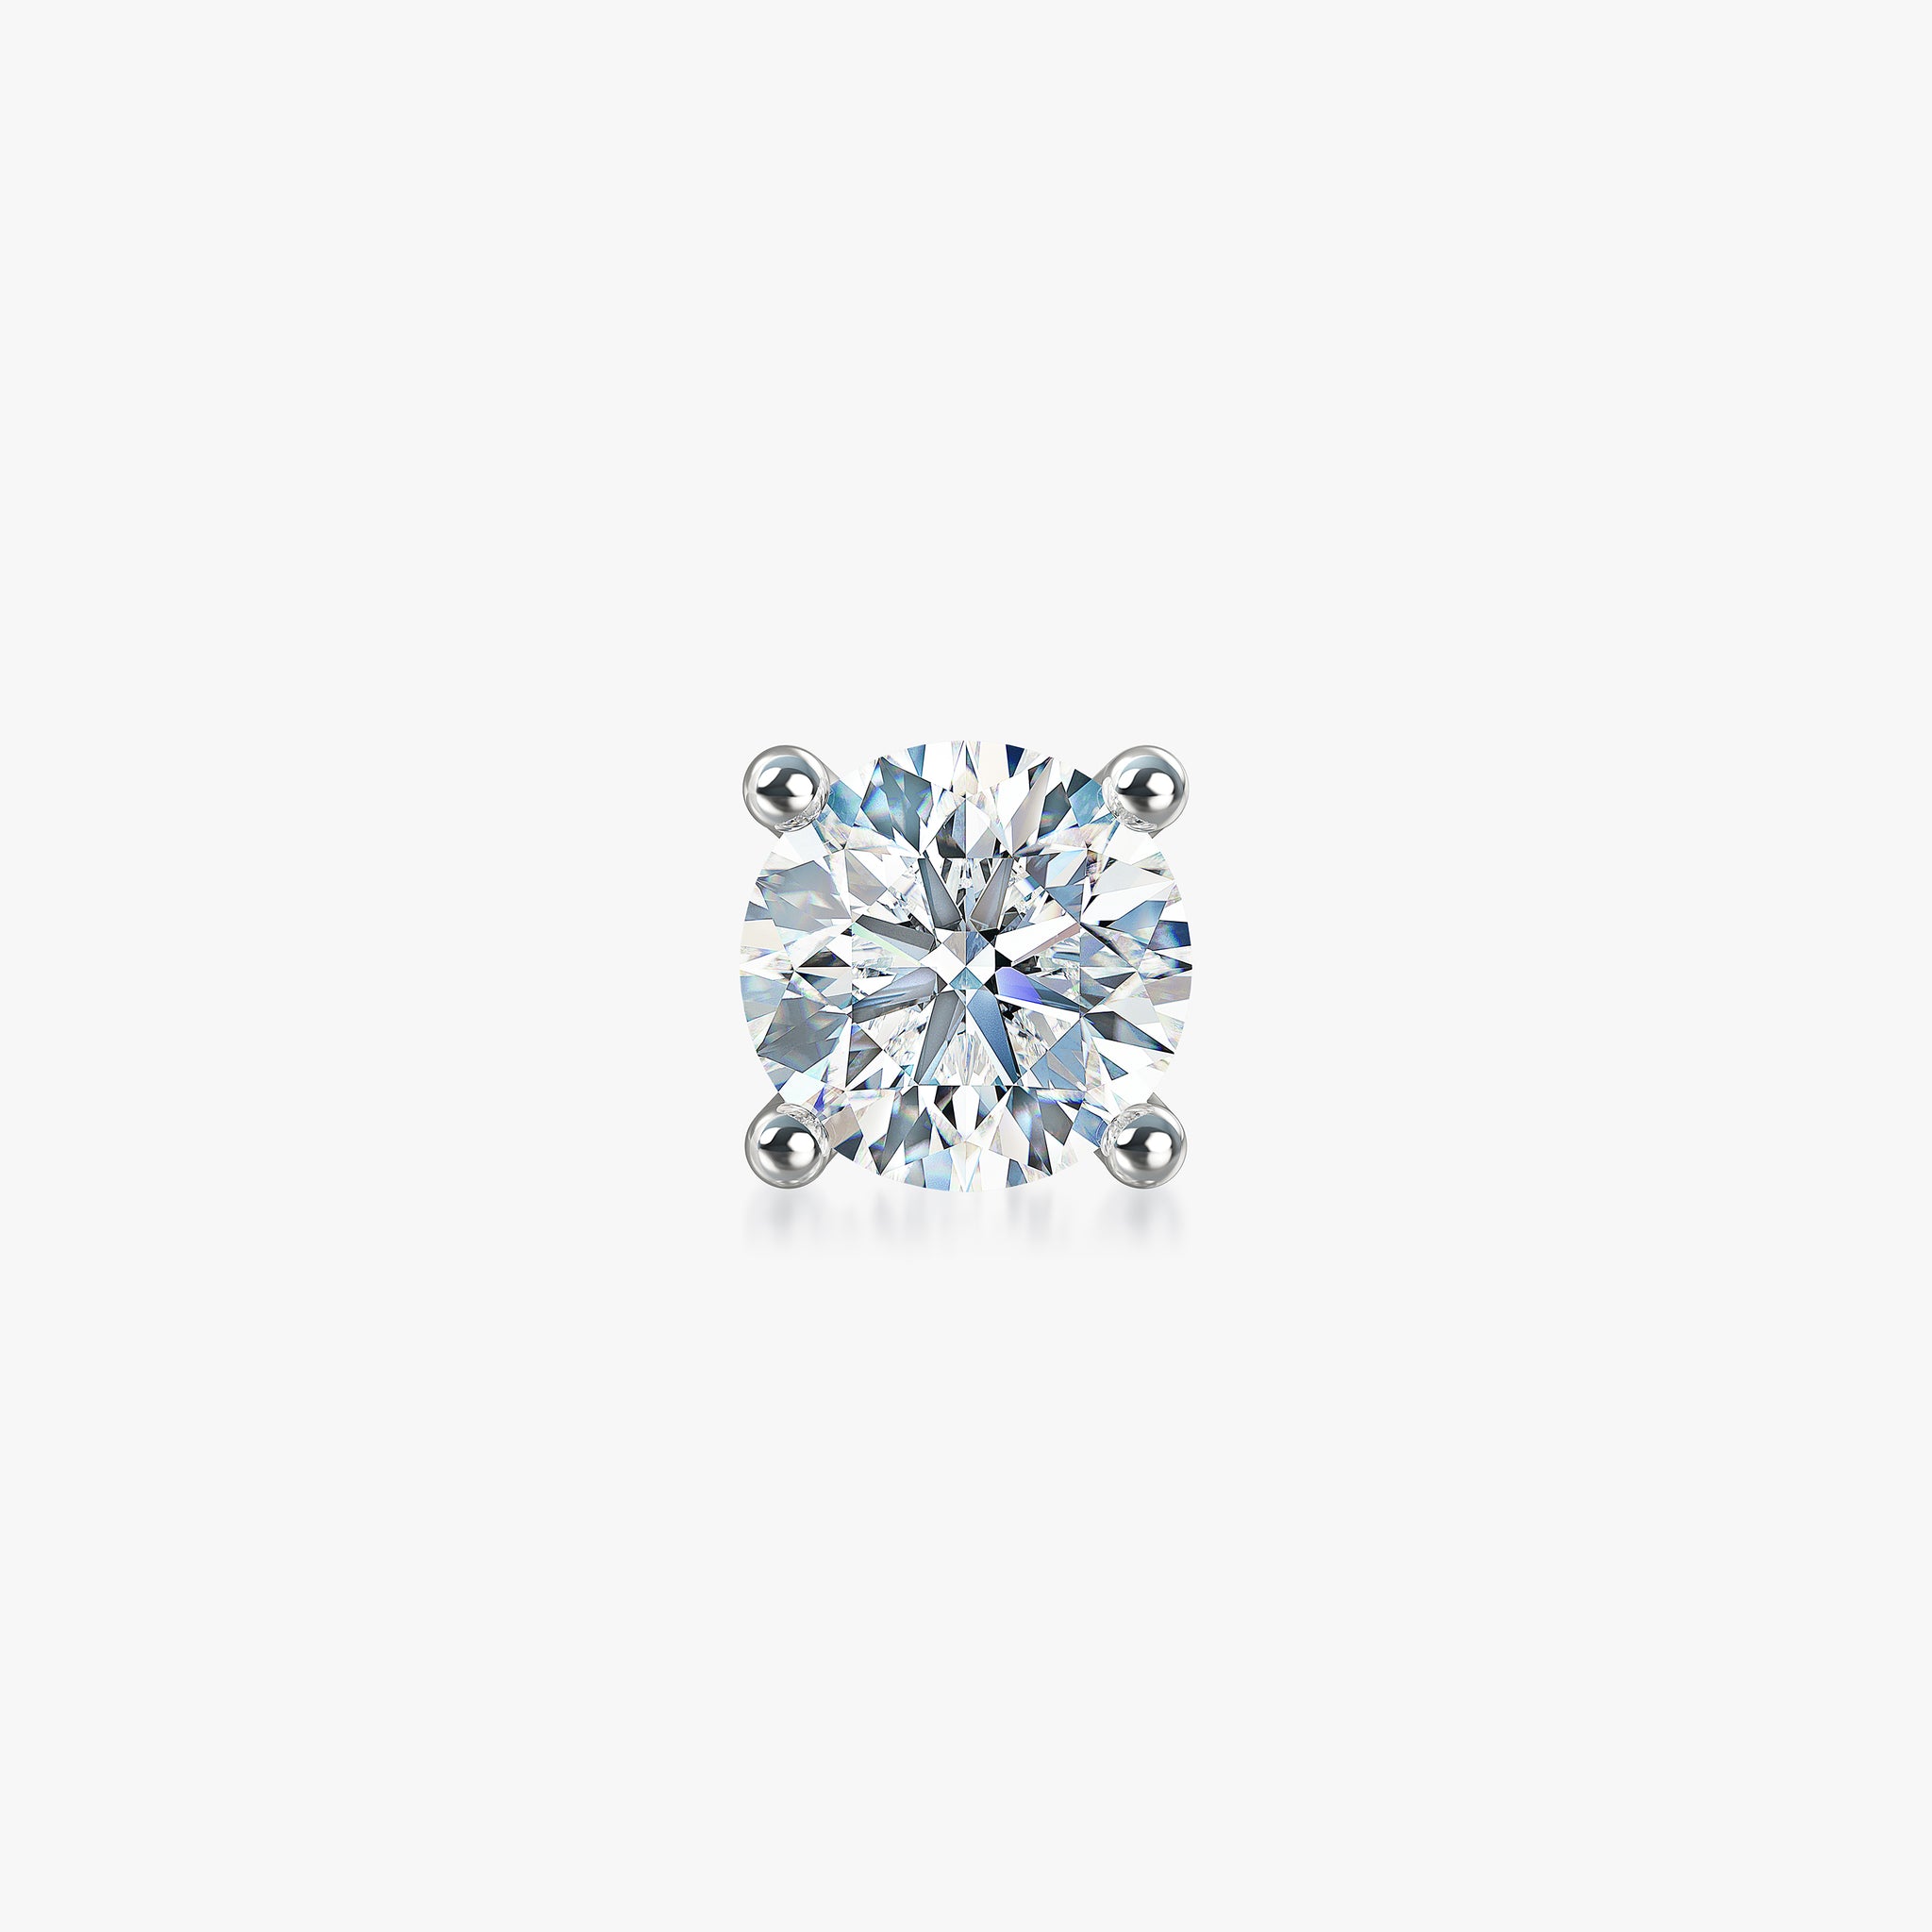 J'EVAR 18KT White Gold ALTR Lab Grown Diamond Single Stud Earring with Guardian Backs Front View